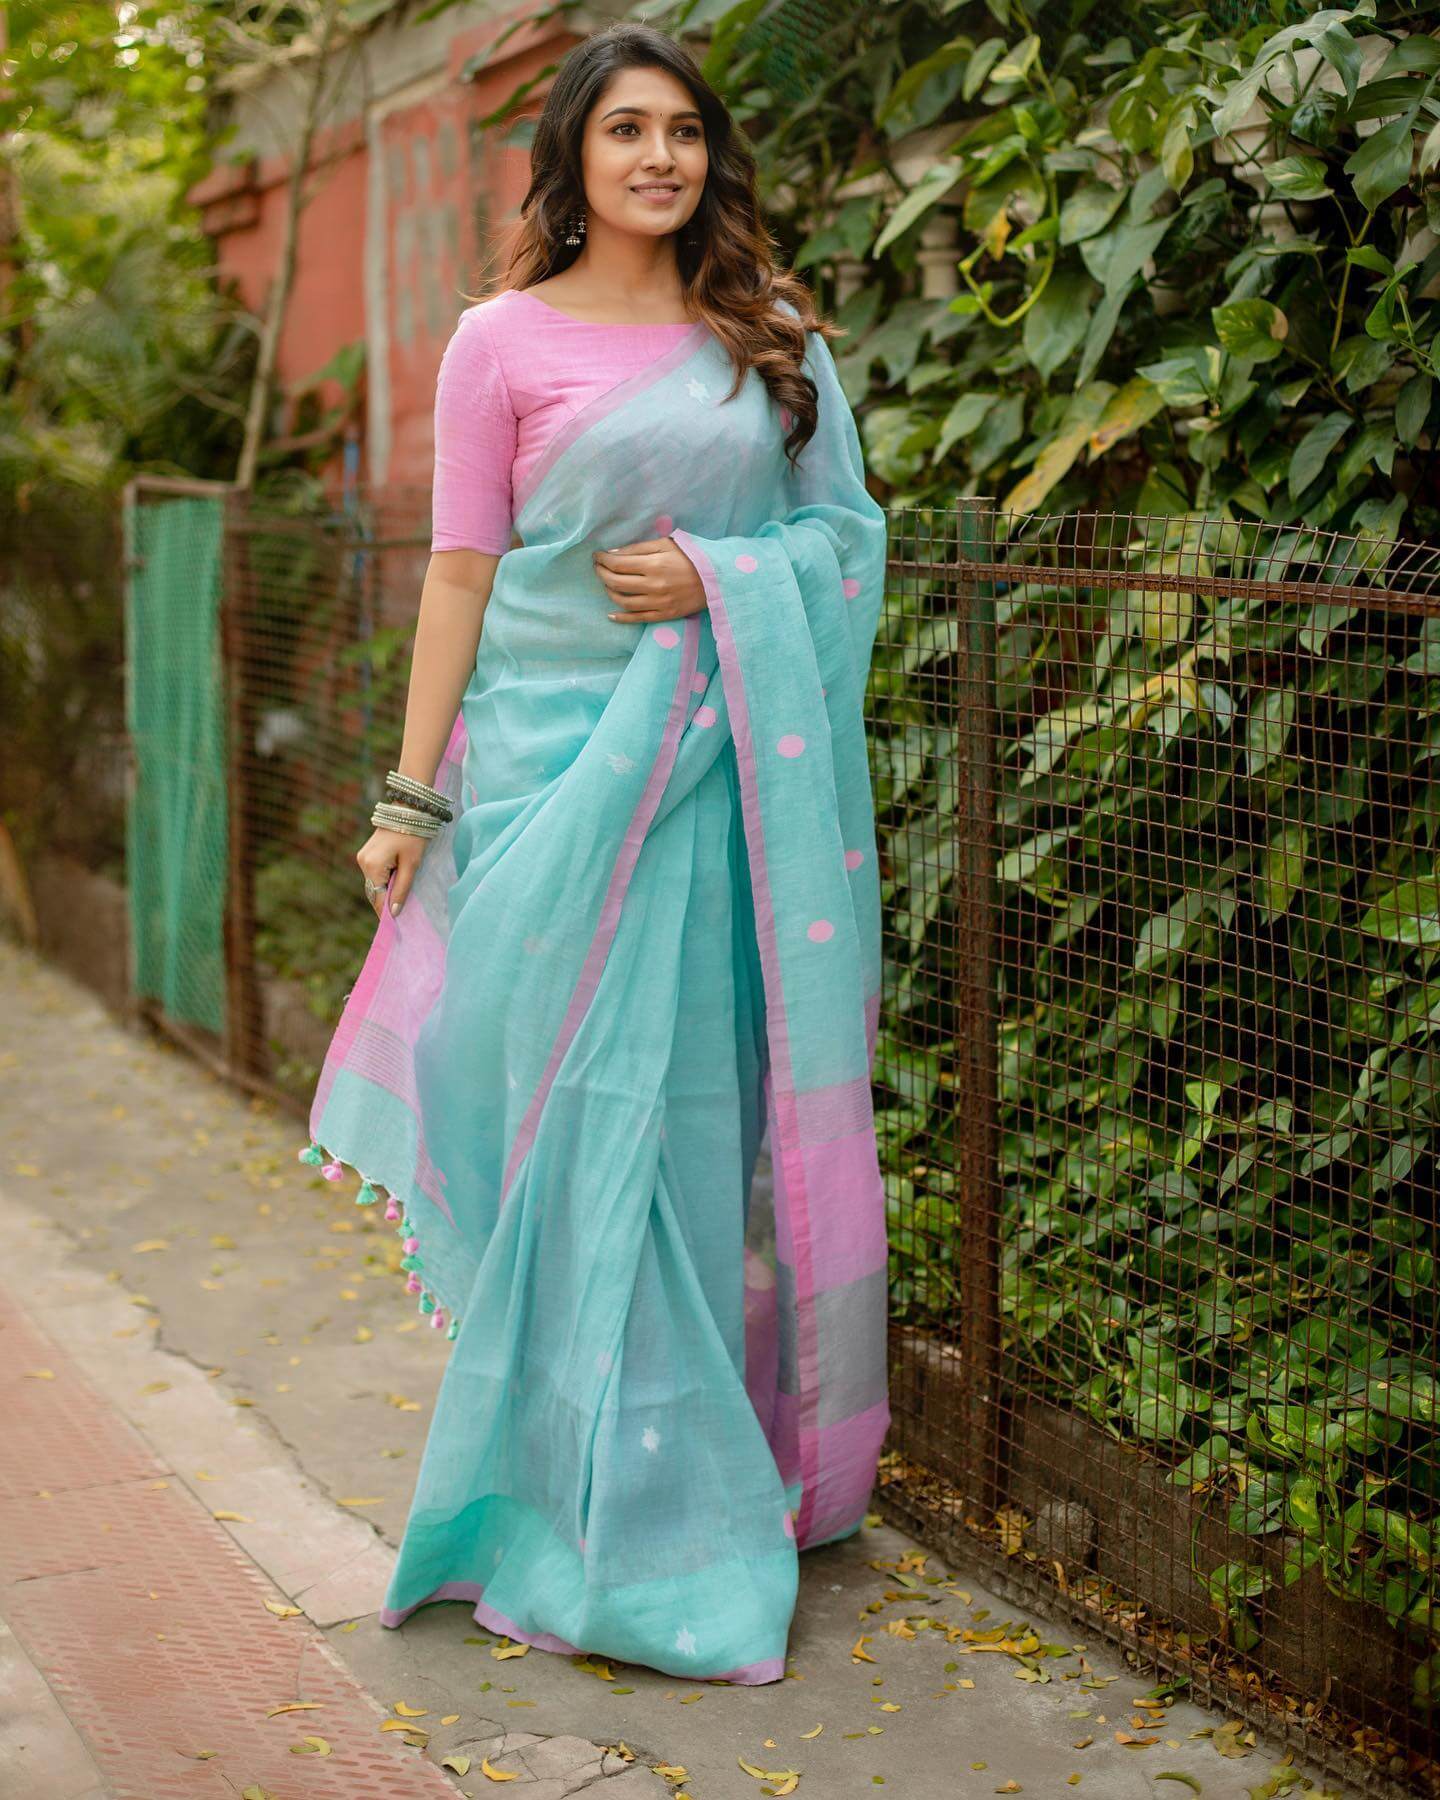 Vani Bhoja Simple & Clean Look In Blue & Pink Cotton Saree With Pink Blouse